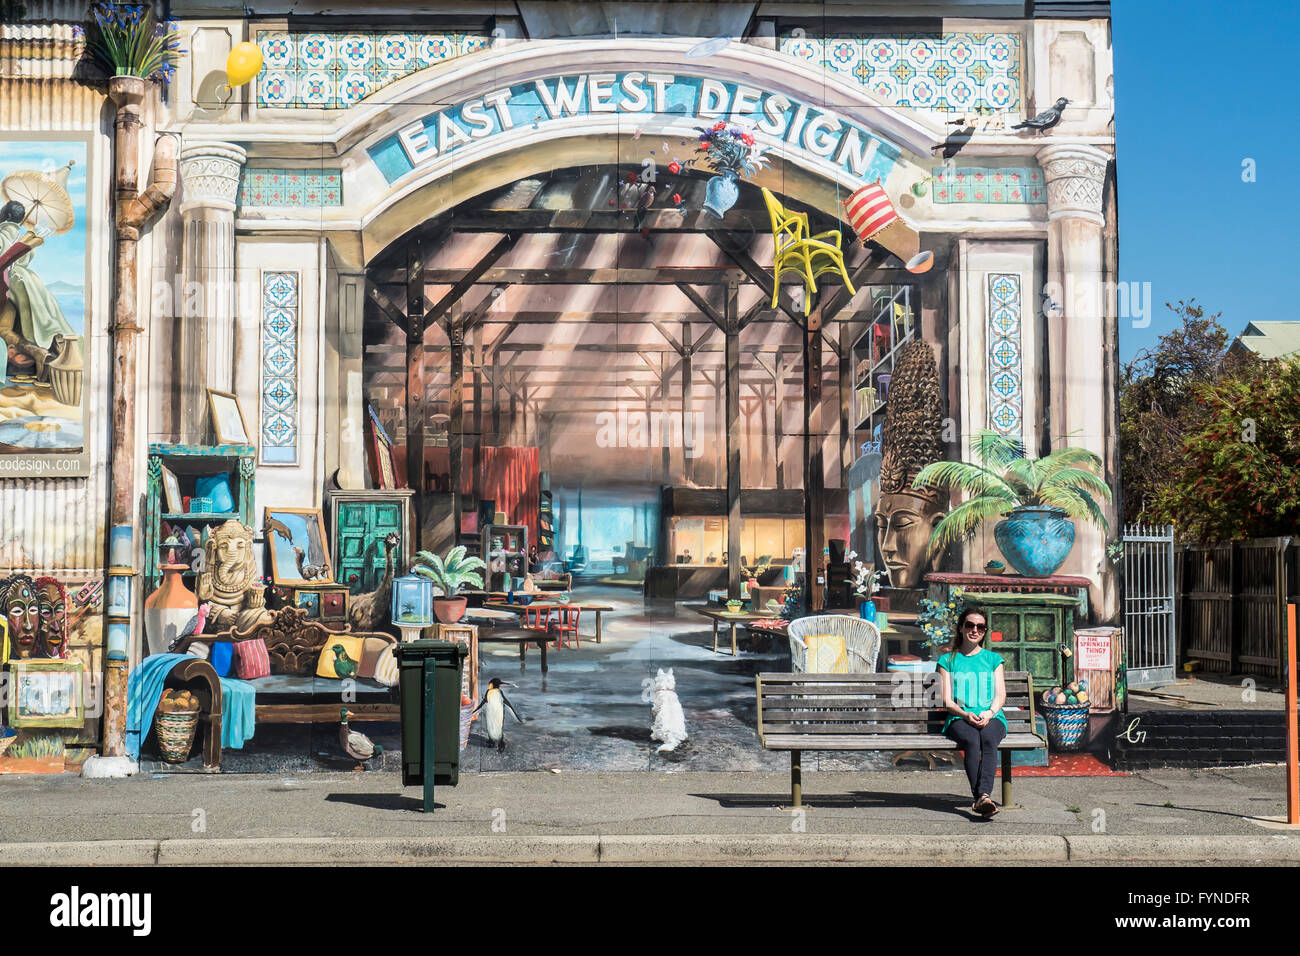 Painted Mural Frontage, East West Design, South Terrace, South Freemantle, Perth, Western Australia Stock Photo